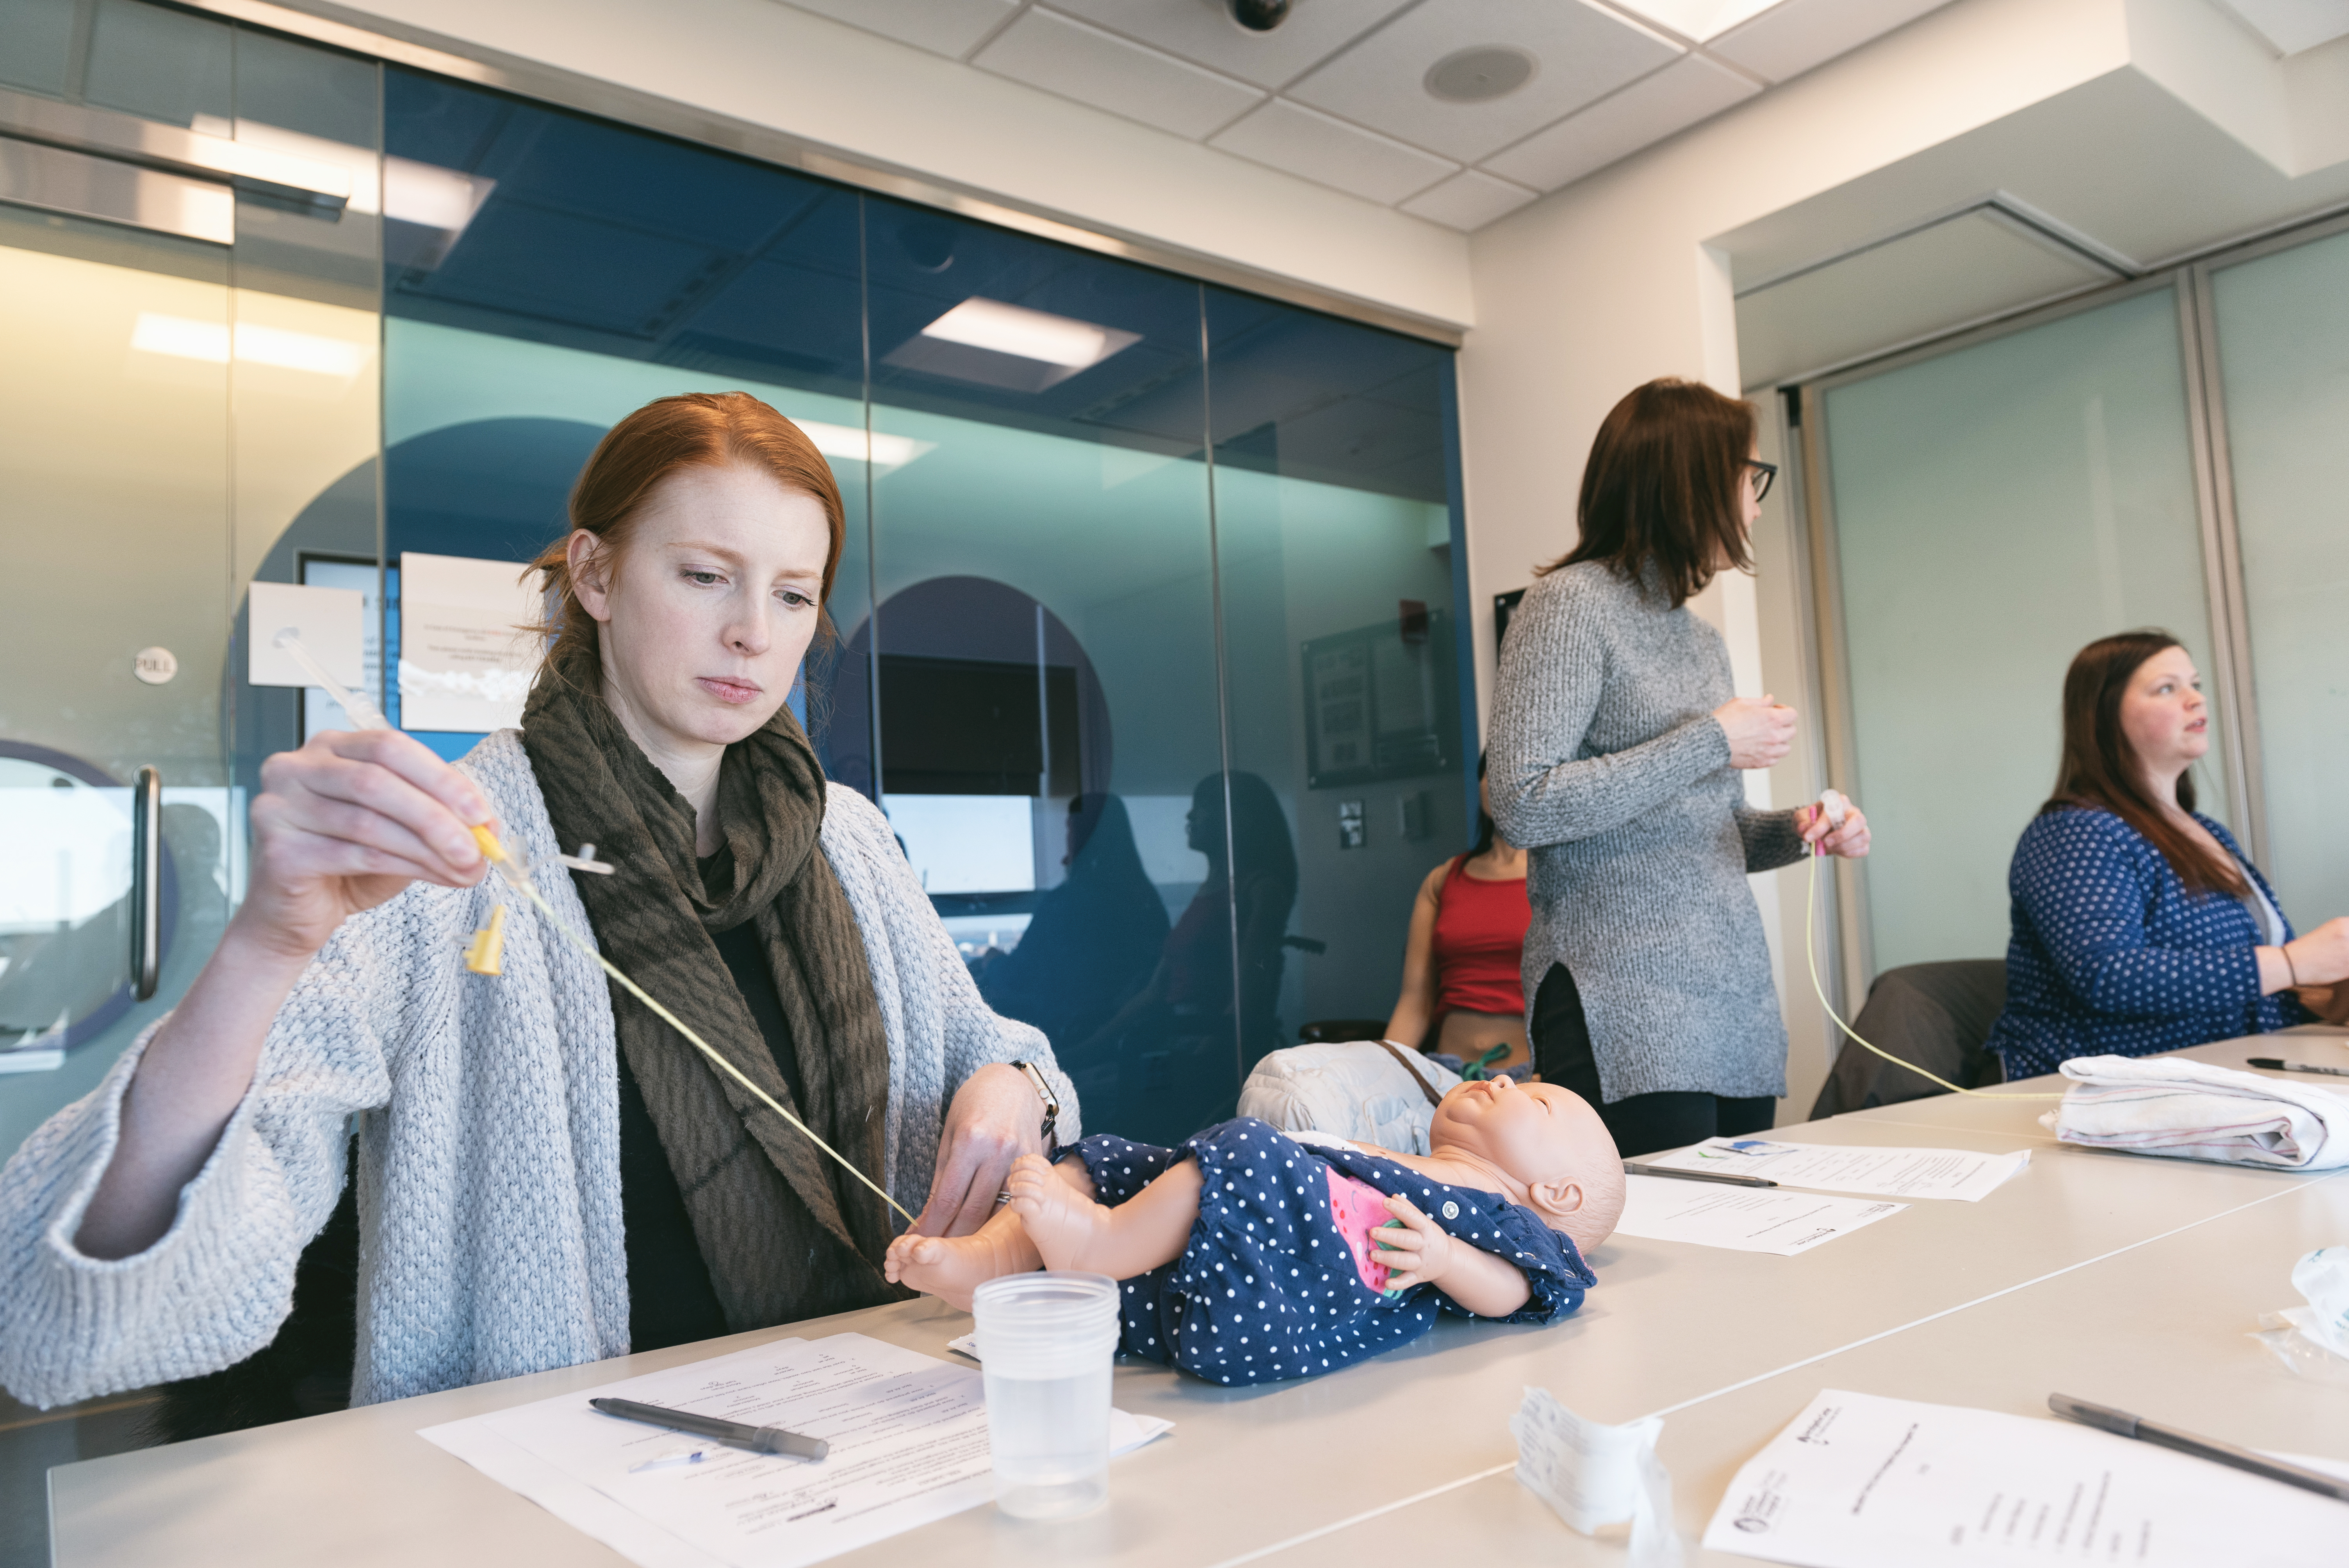 Woman with red hair, green scarf, and grey sweater sits at a table as she practices incisions on a baby doll.